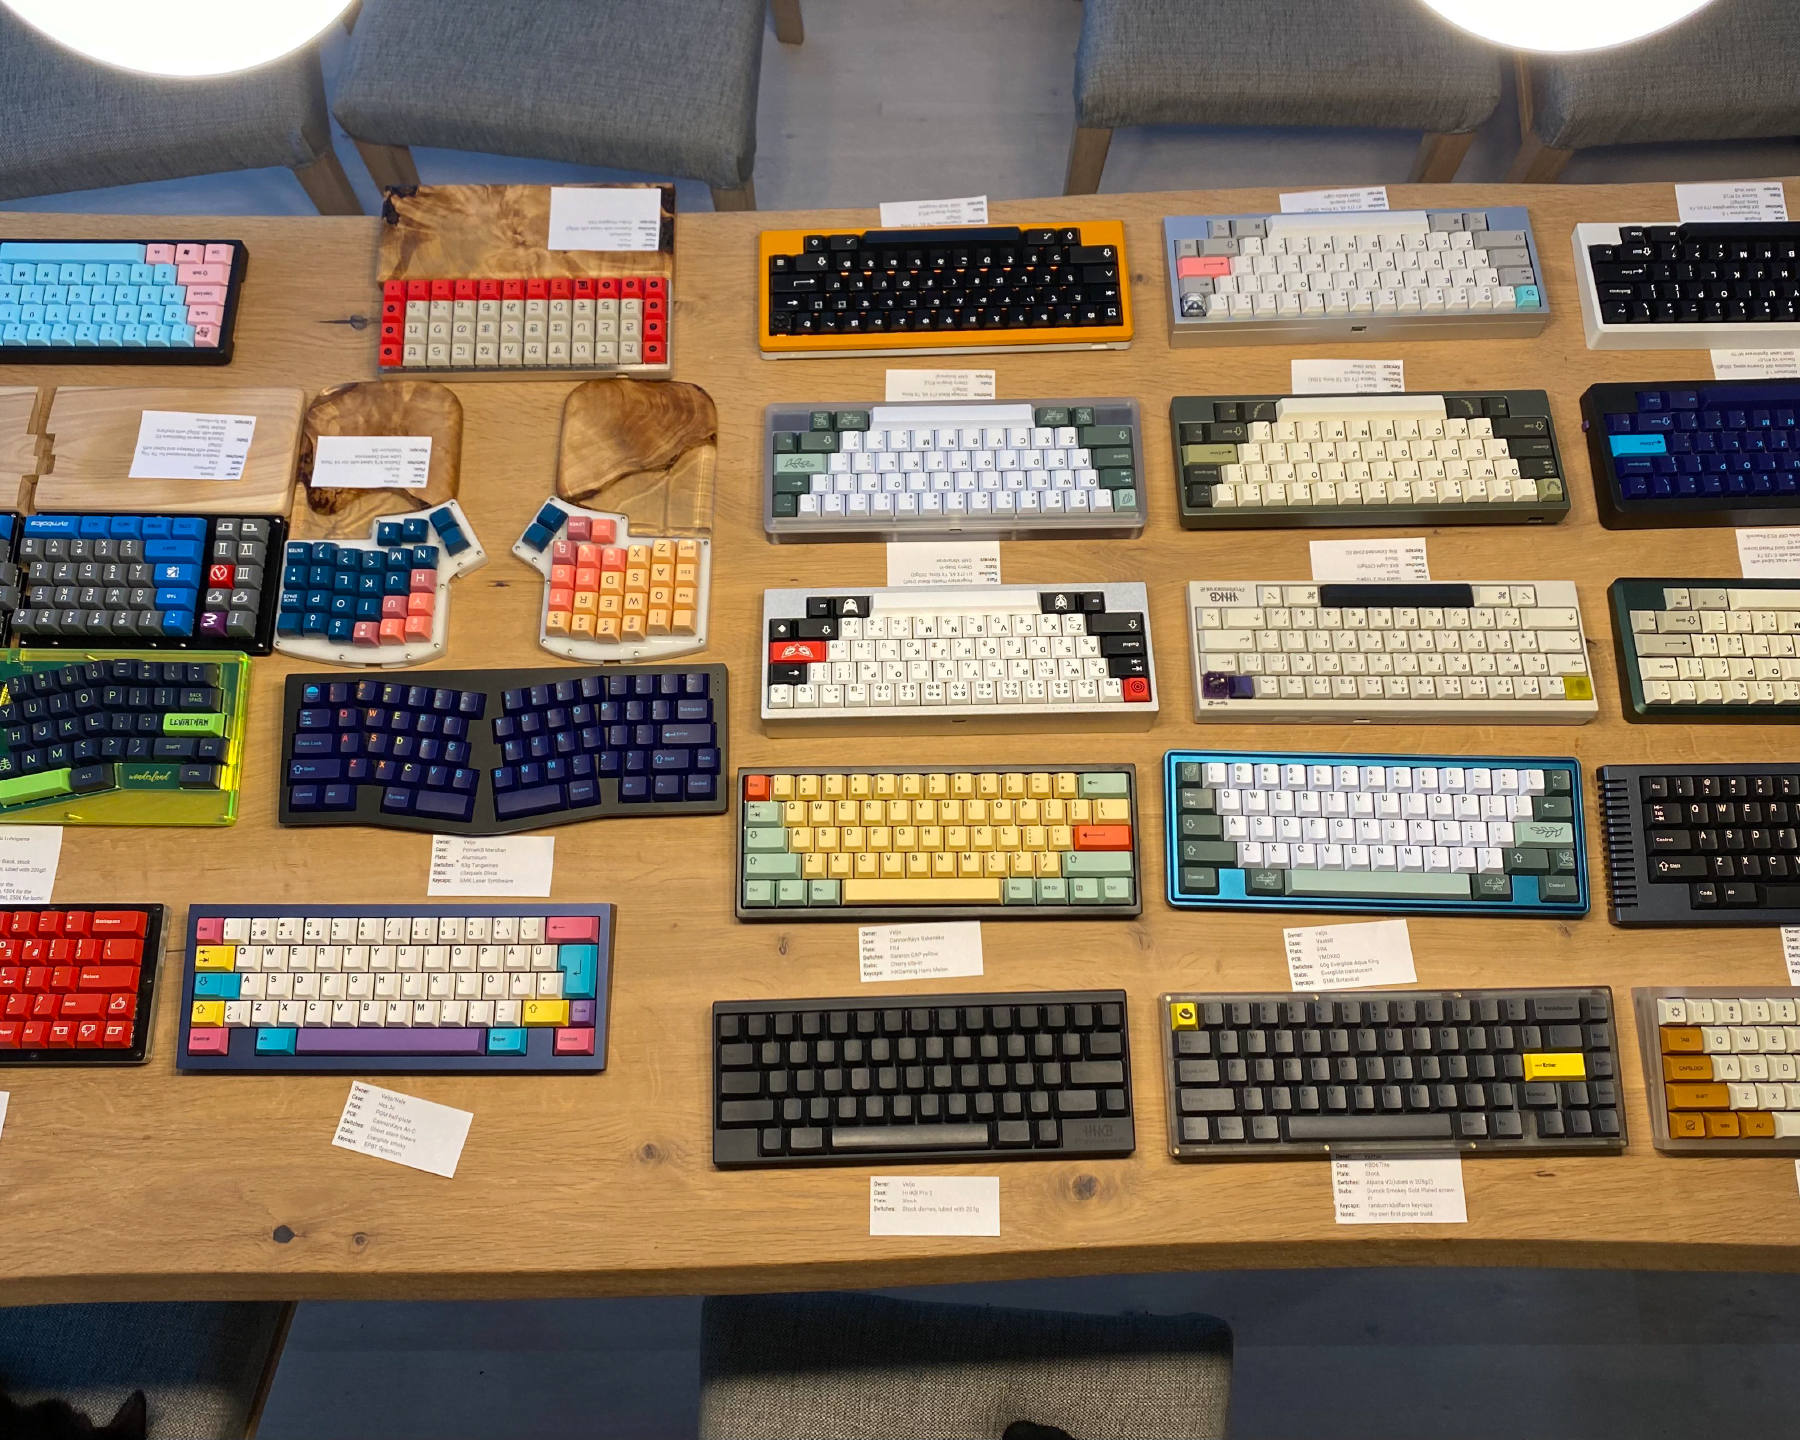 First meetup, over shot image of the keyboards and their labels